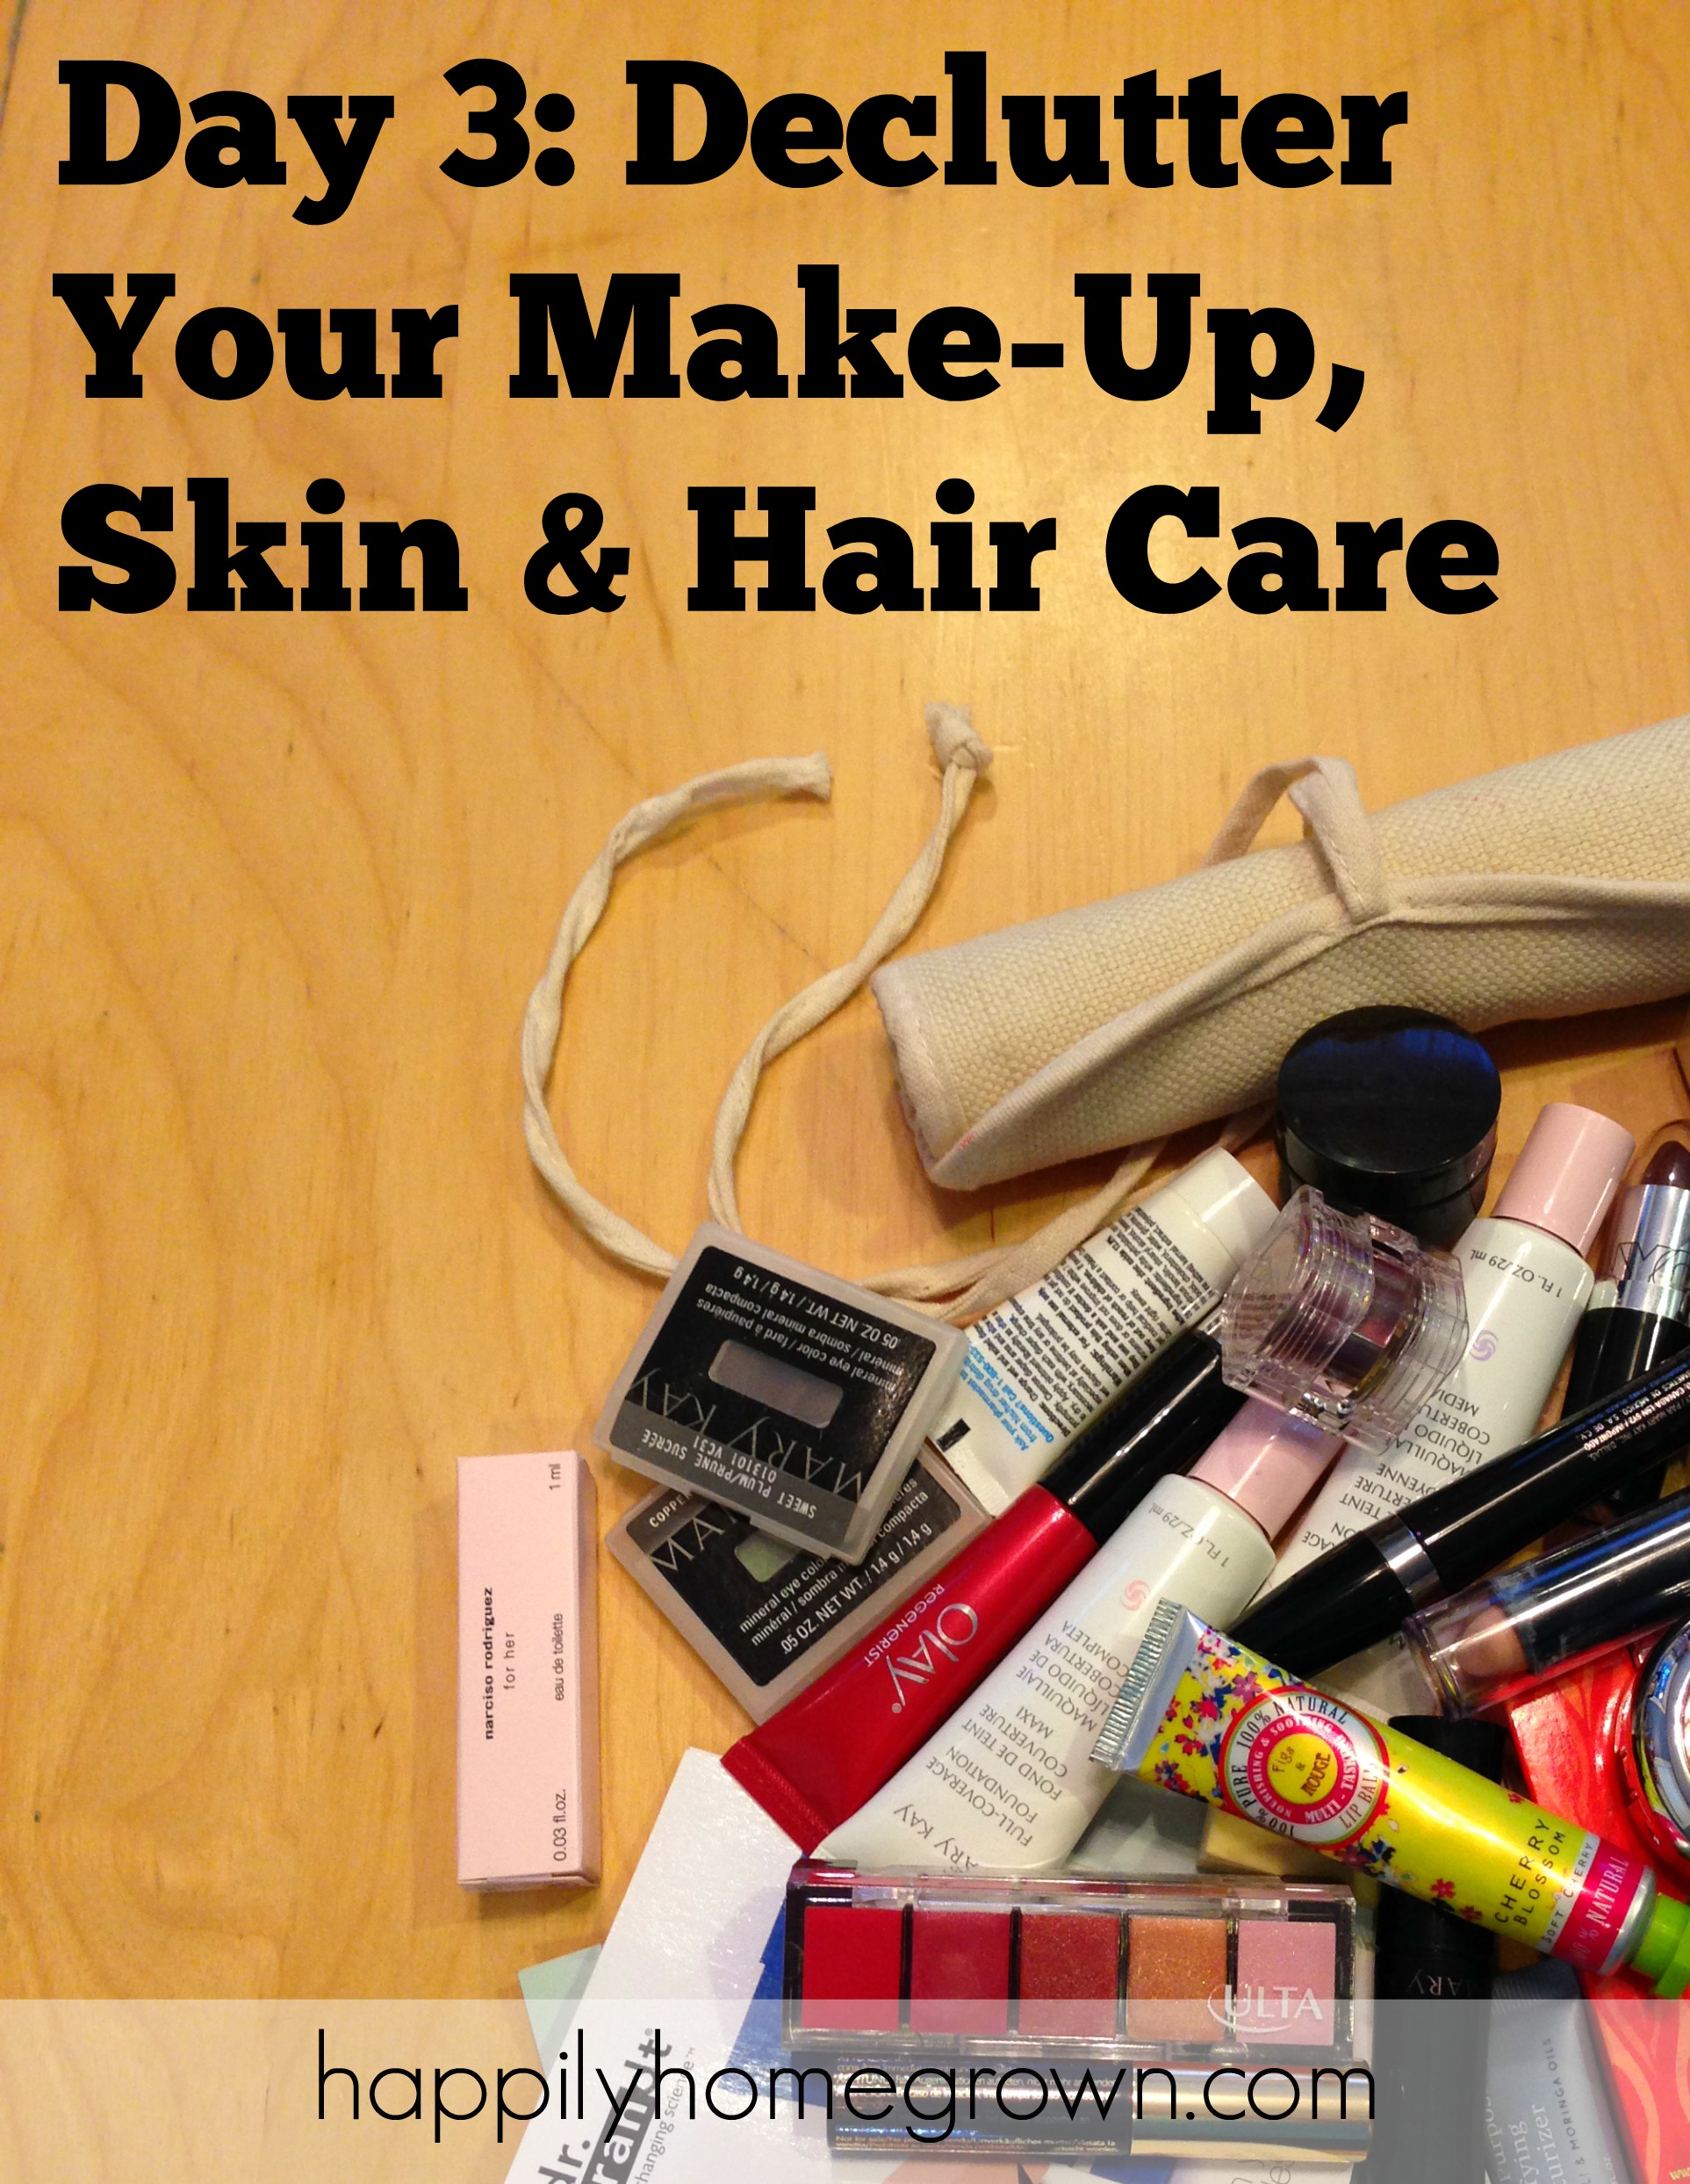 Day 3 Declutter Your Make-Up, Skin & Hair Care